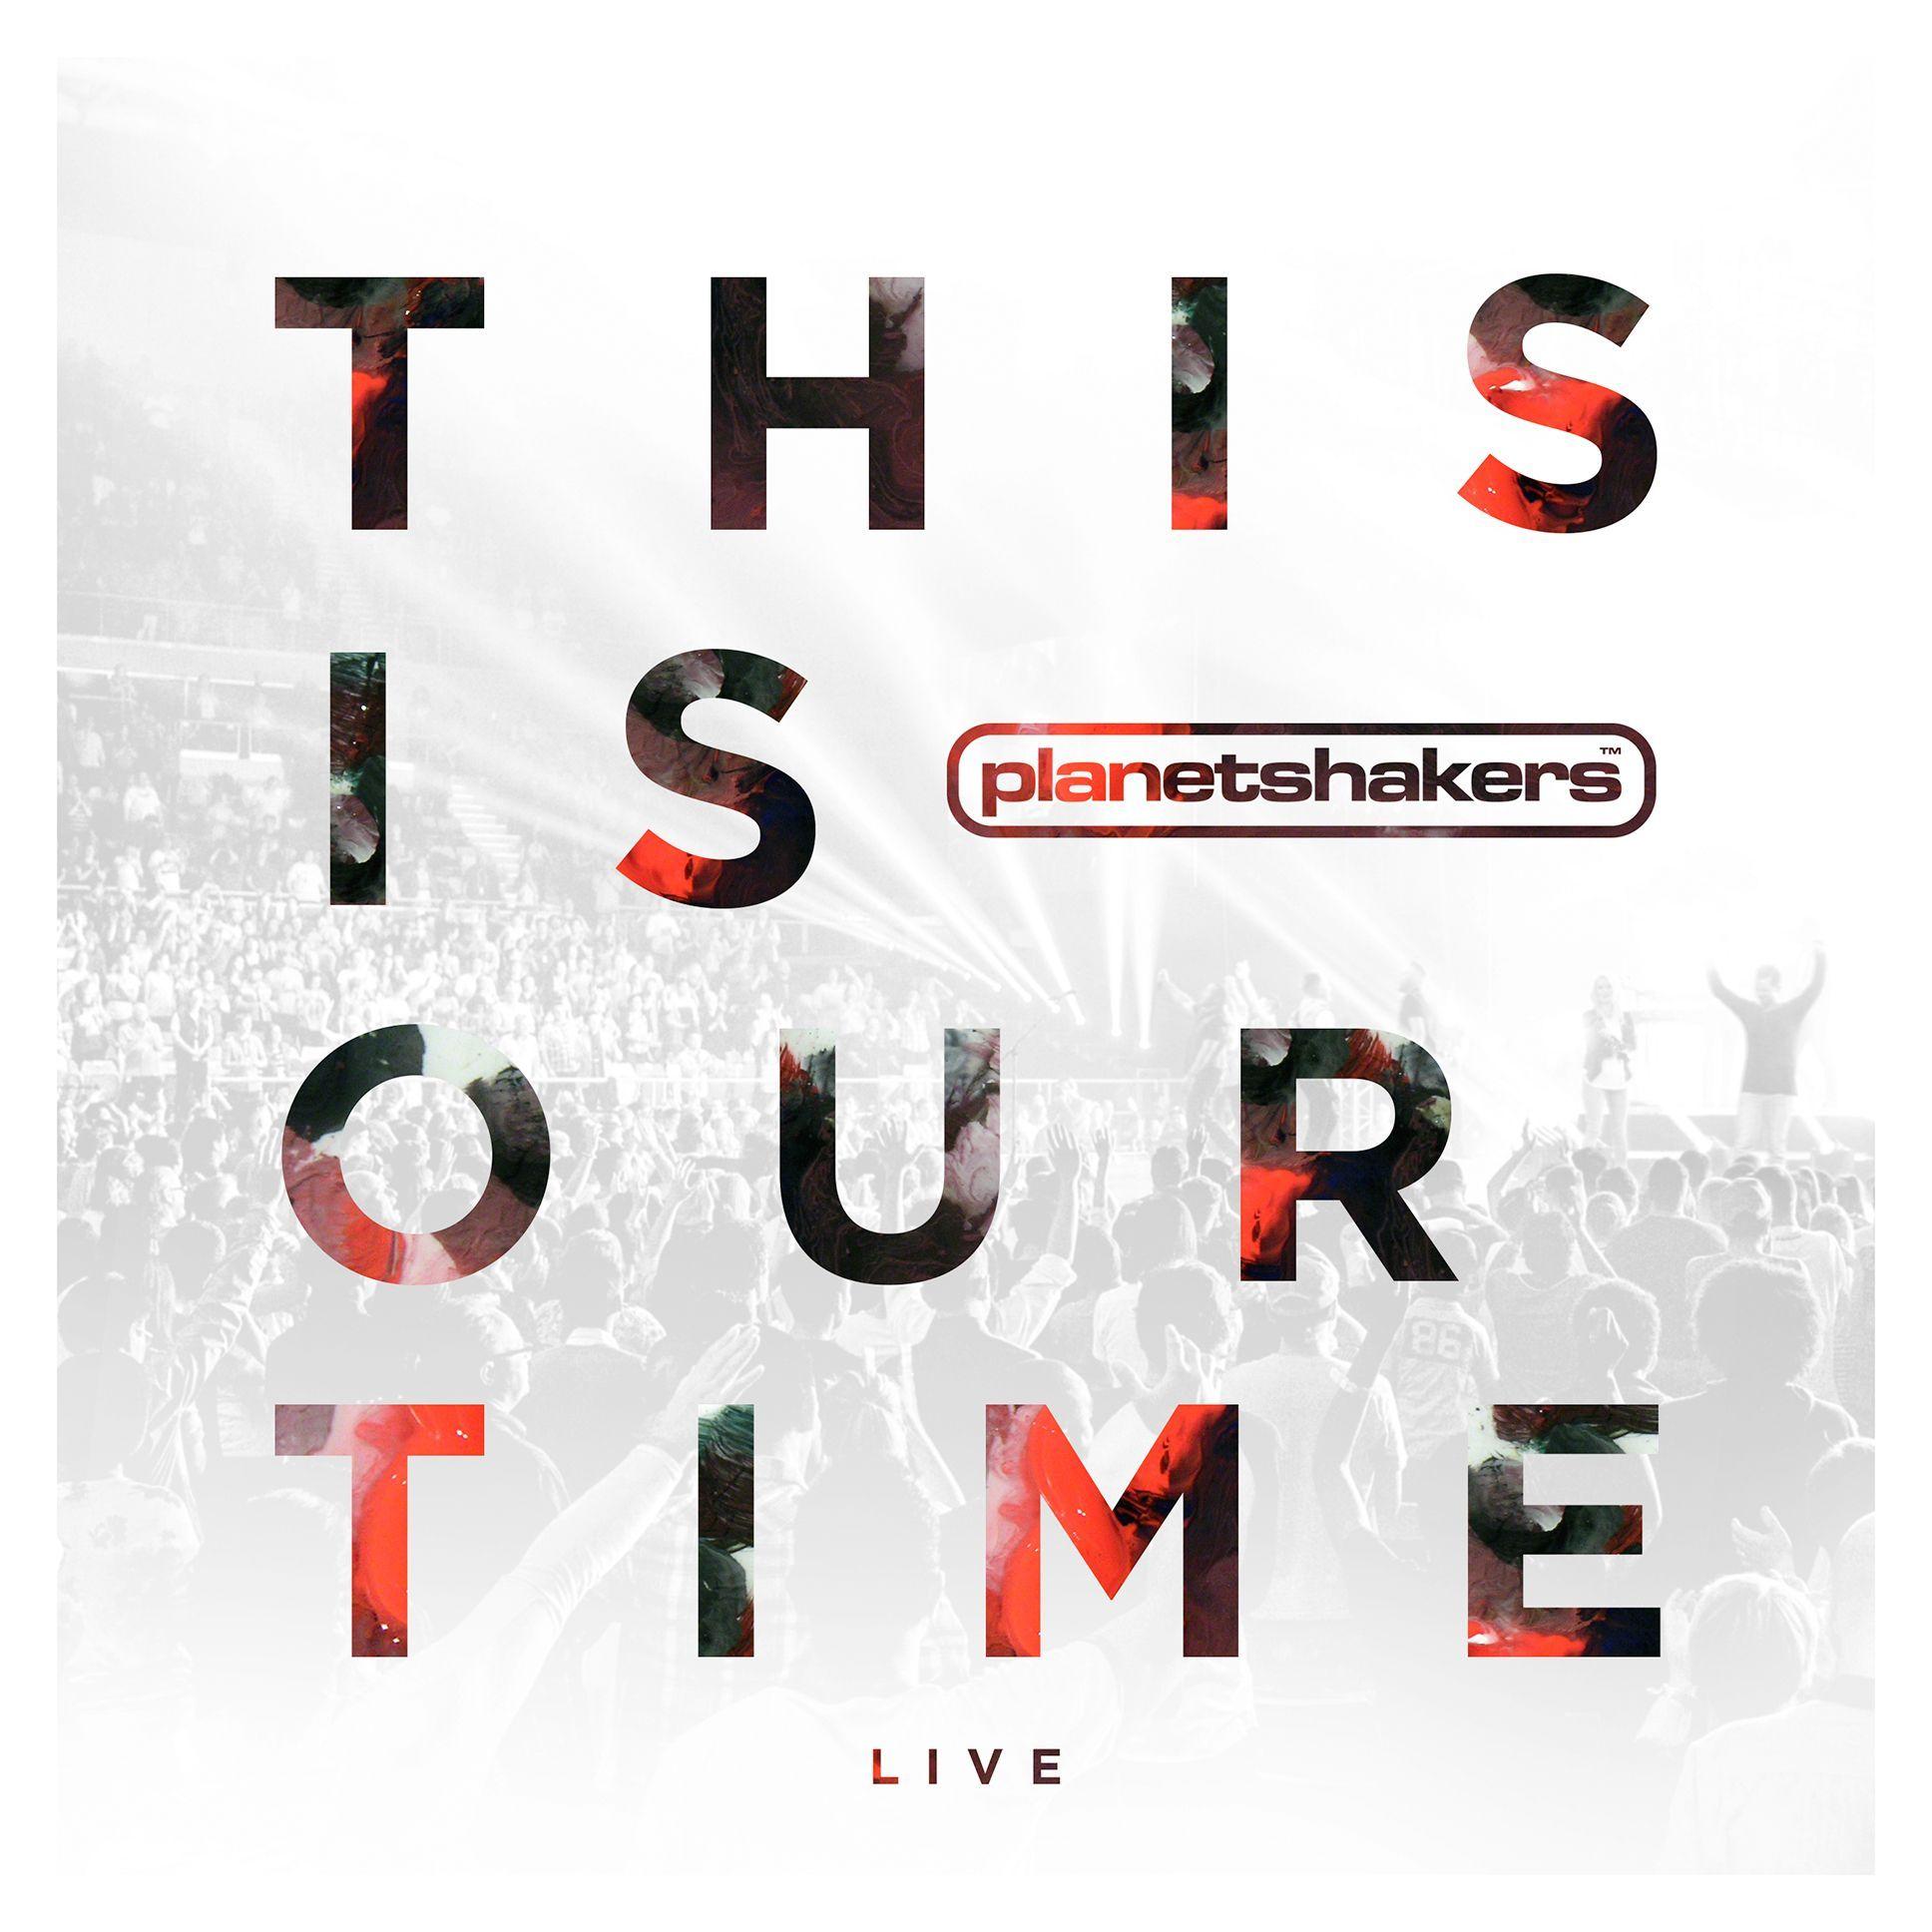 We are excited to announce Planetshakers NEW LIVE PRAISE & WORSHIP